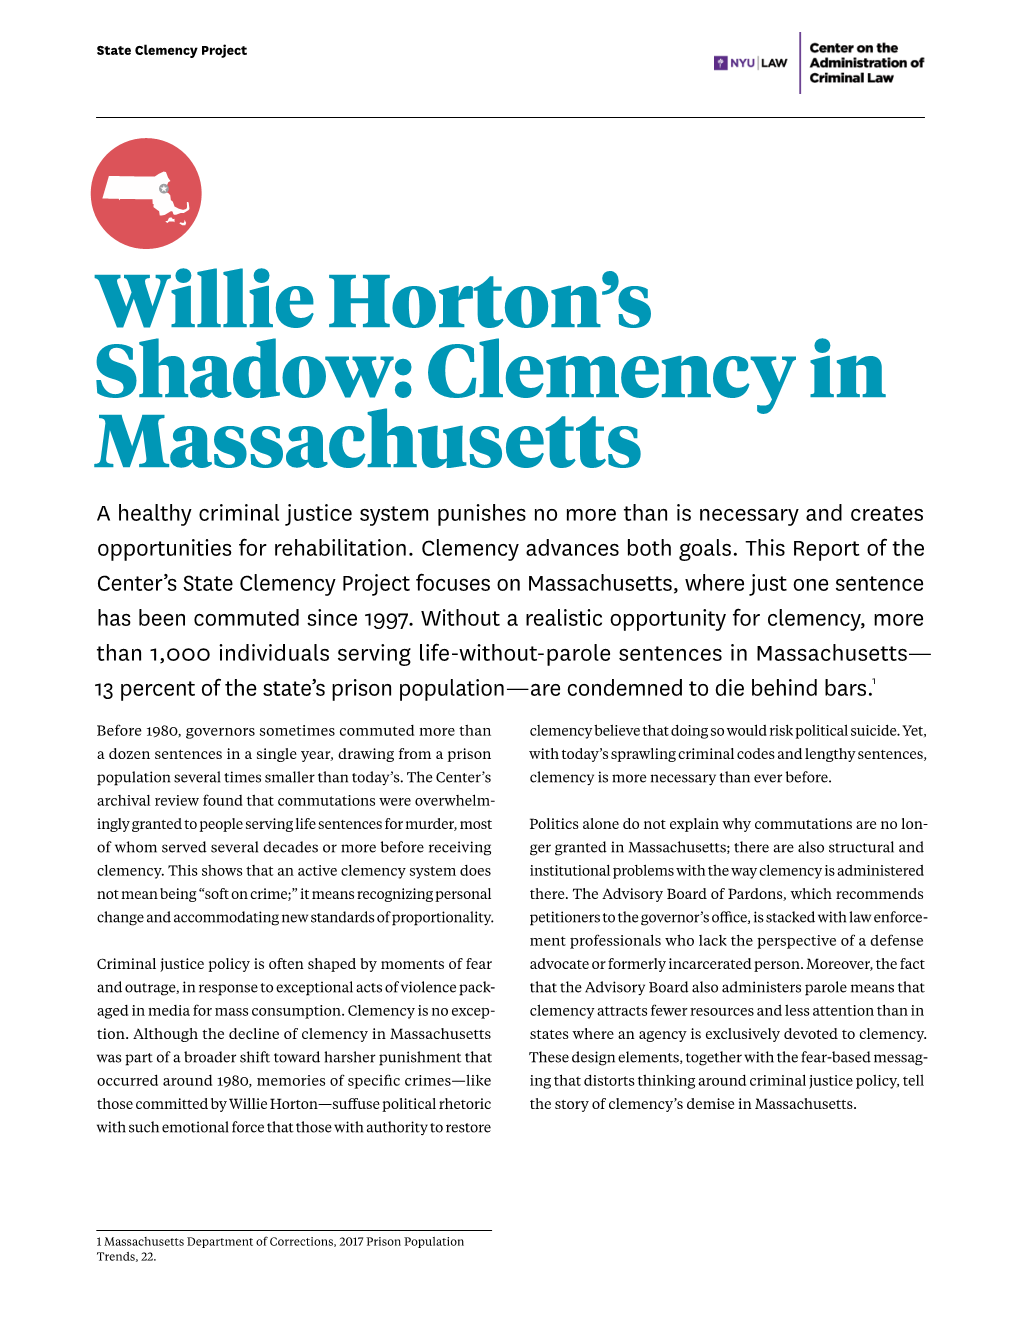 Clemency in Massachusetts a Healthy Criminal Justice System Punishes No More Than Is Necessary and Creates Opportunities for Rehabilitation